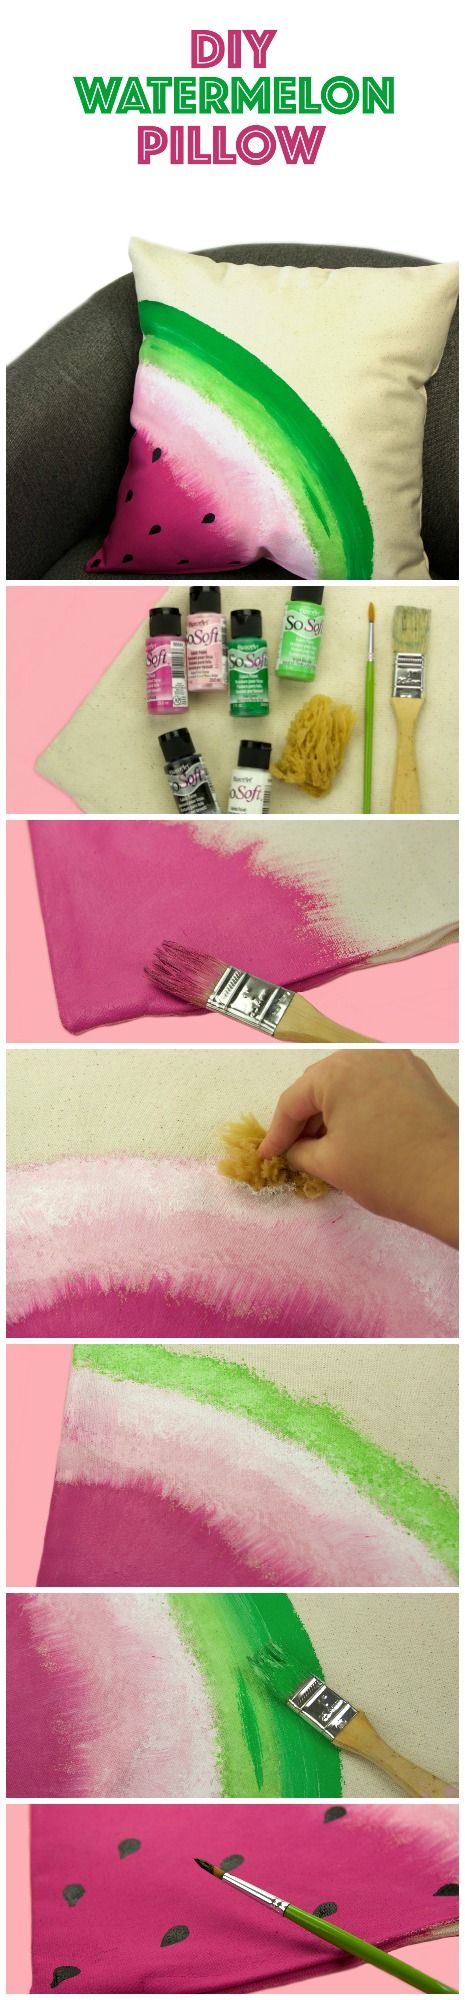 I’m coming at you today with another easy and fun DIY Pillow idea! I know we...